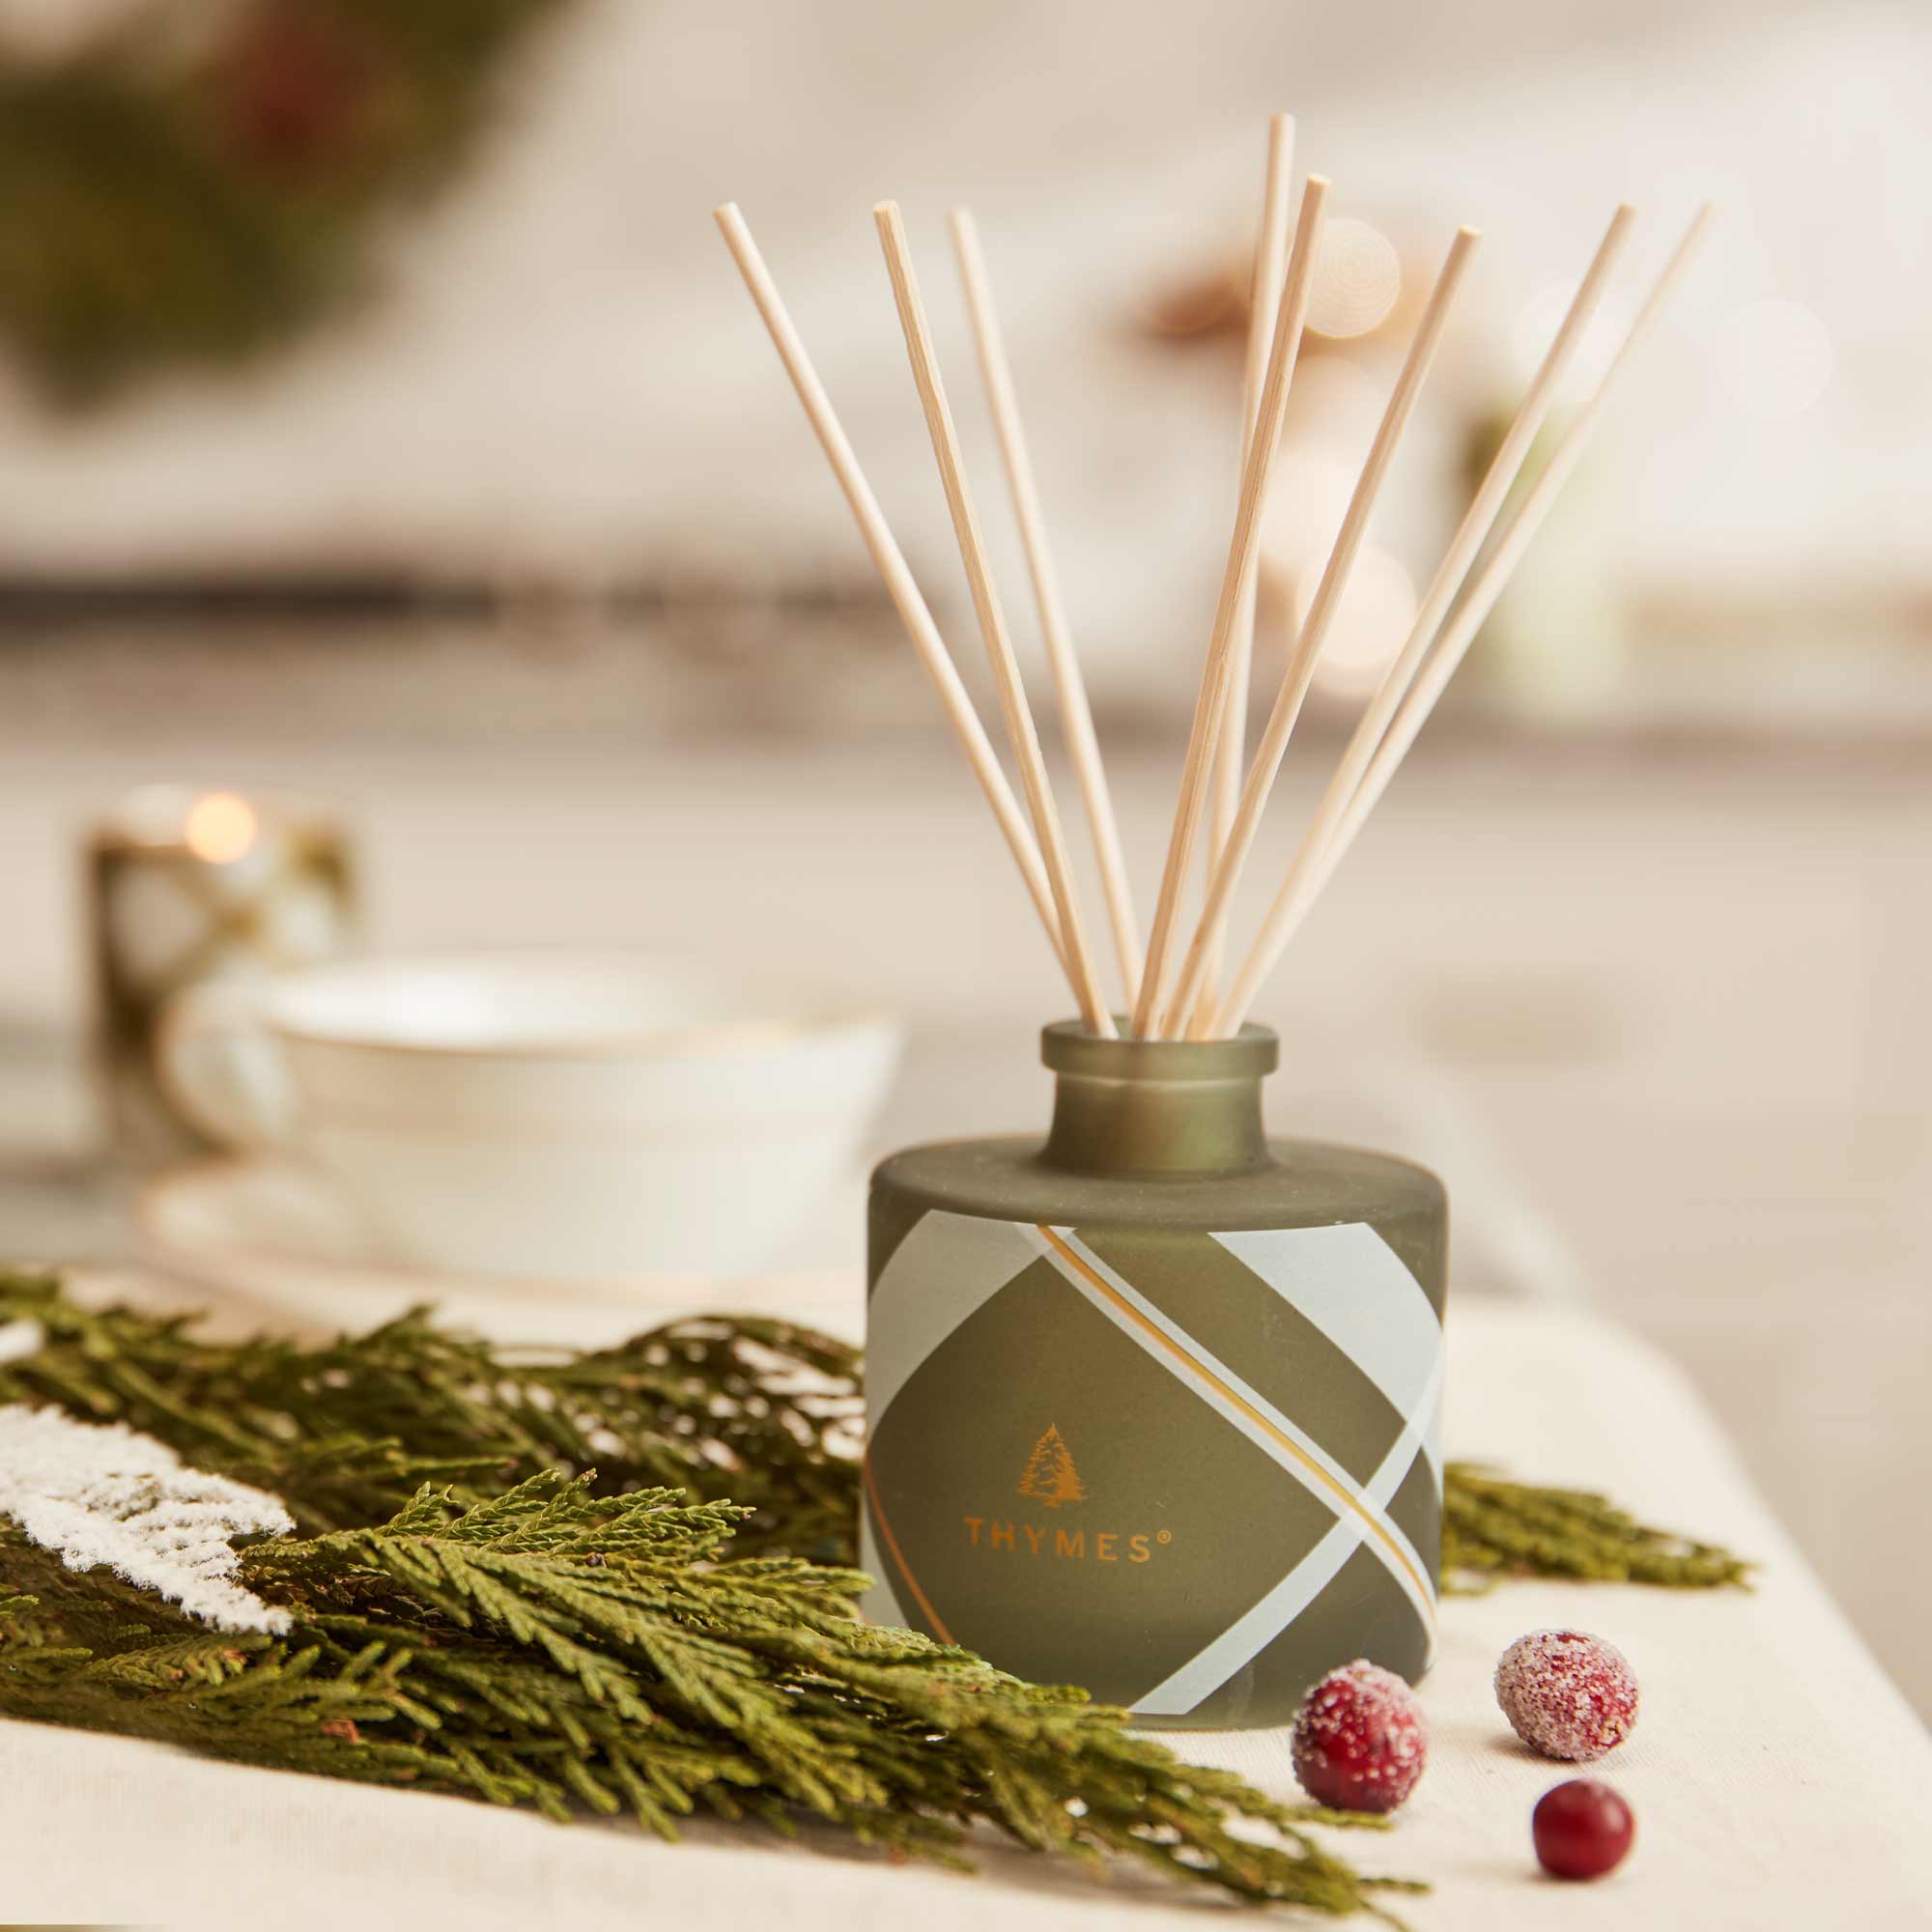 Thymes Frasier Fir Reed Diffuser Petite Gold 4 Oz - Digs N Gifts